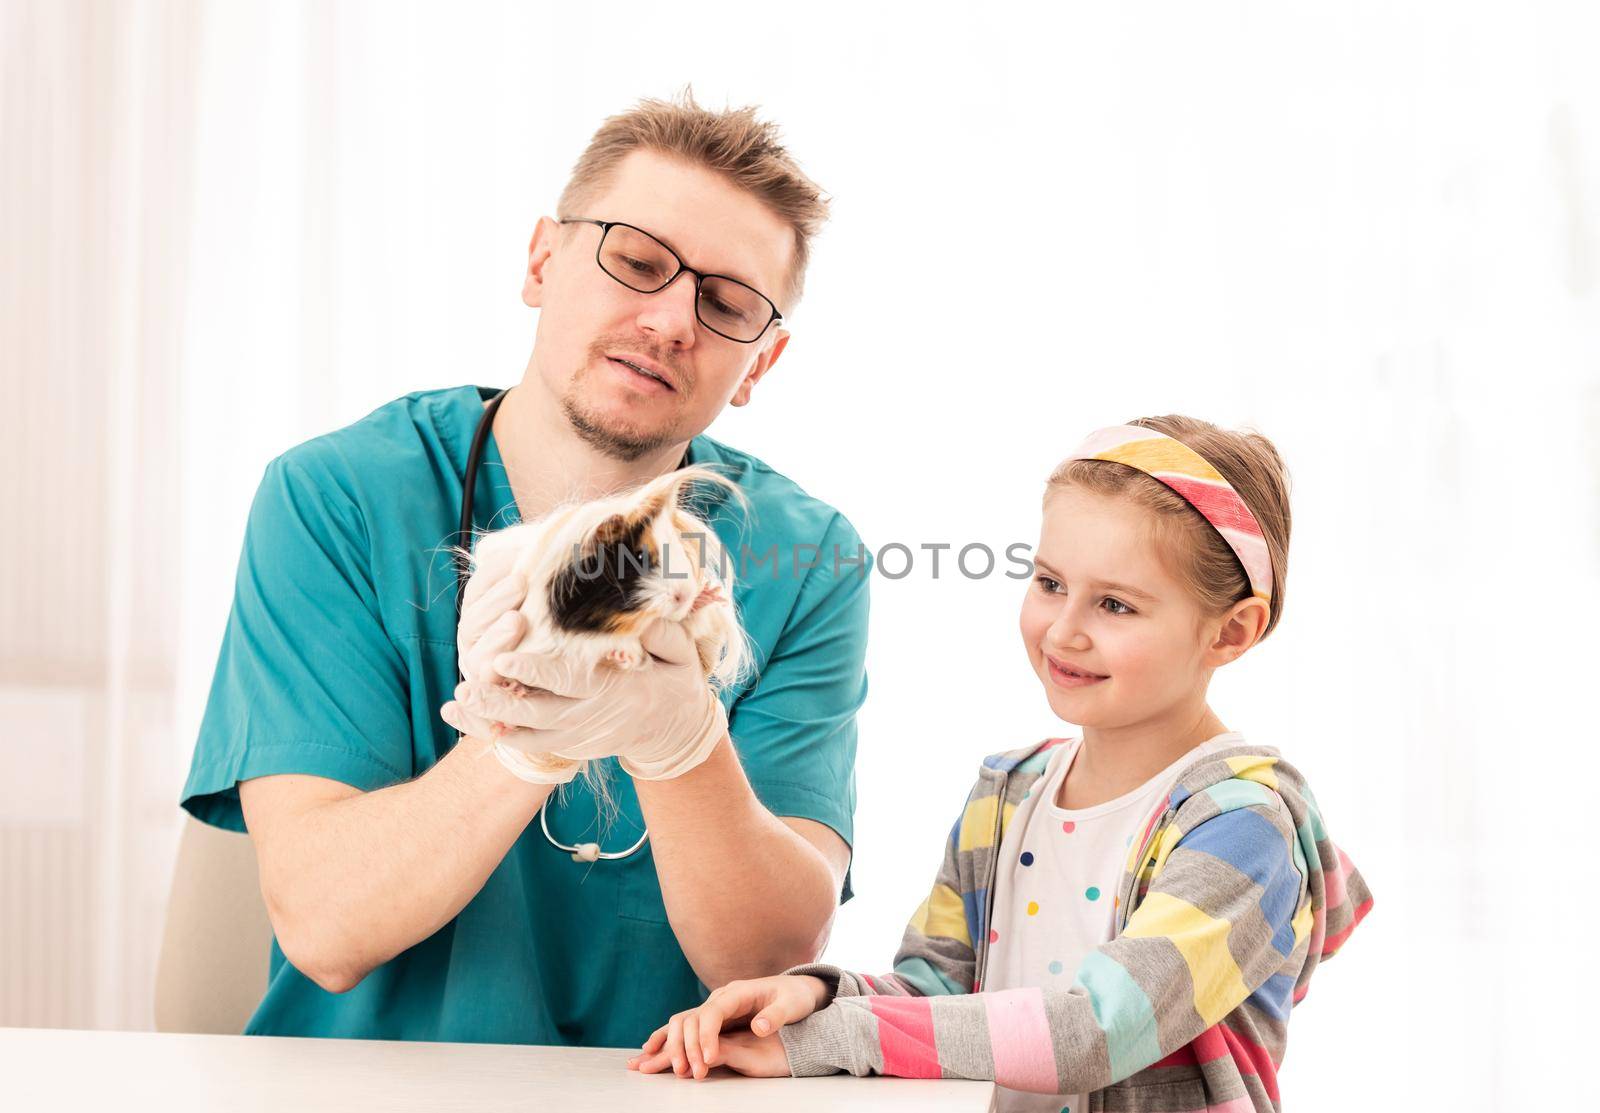 Peruwian guinea pig was brought to veterinarian clinic by little girl-owner, isolated on white background